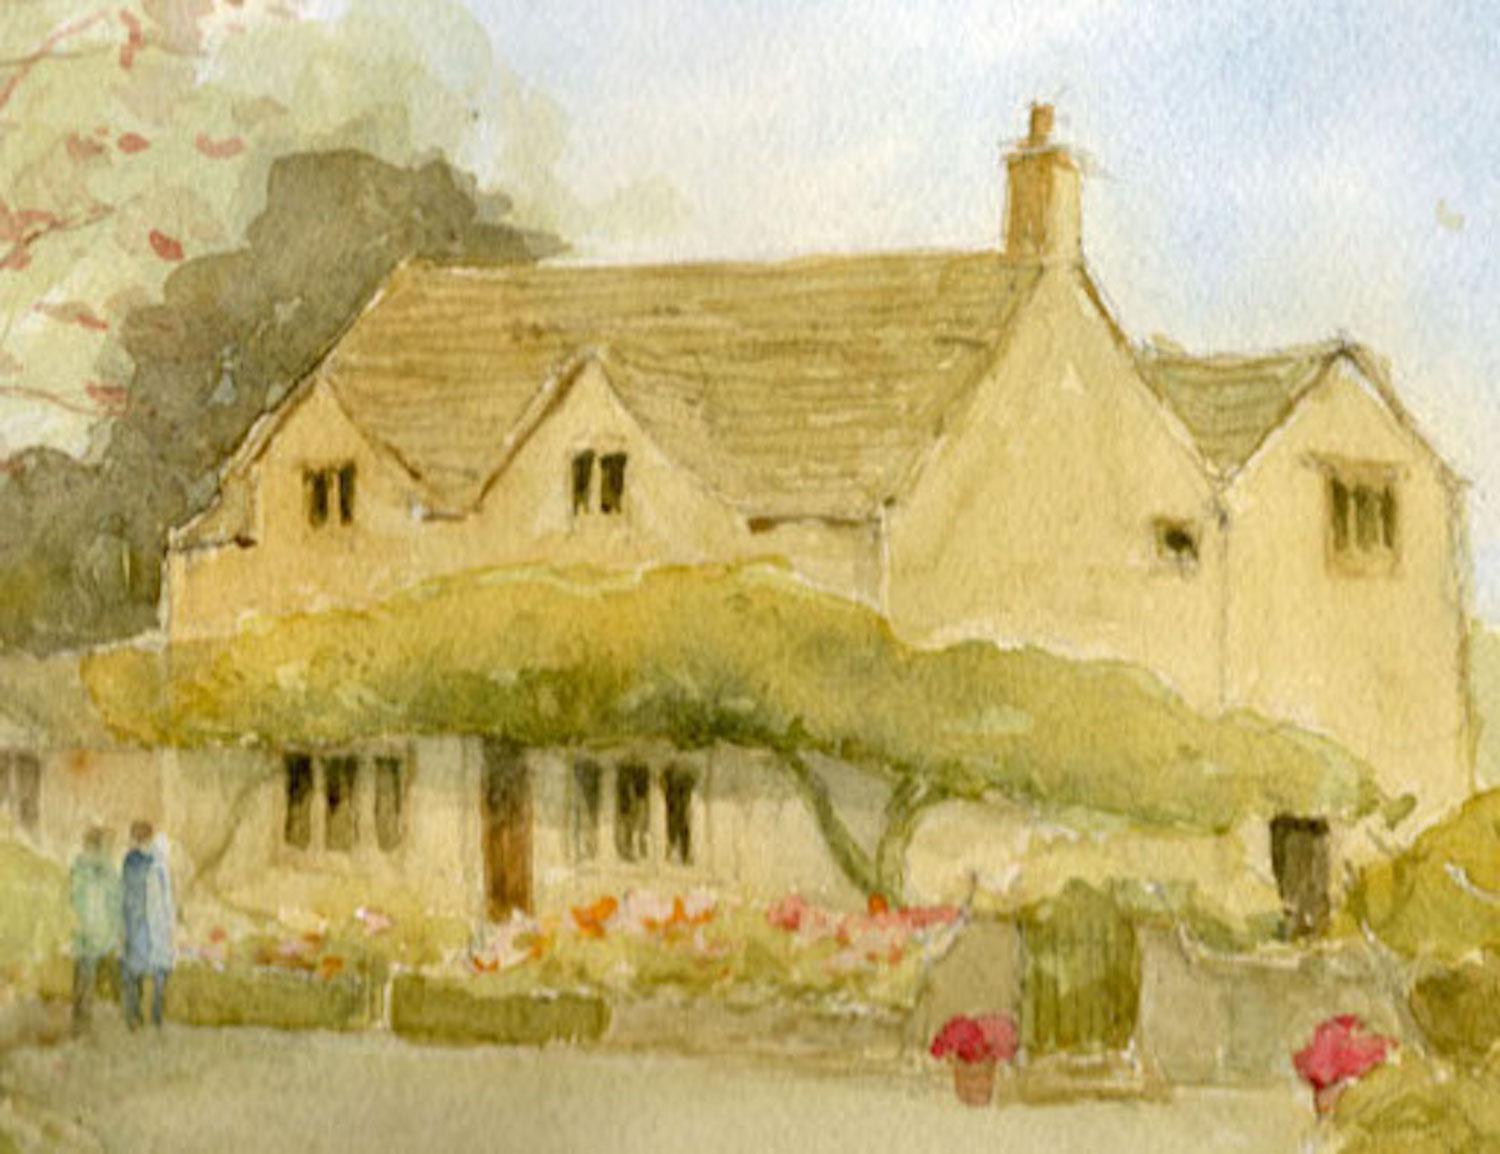 Elizabeth Chalmers, Lady Cottage in Nottgrove, Cotswold Art, English Painting 2